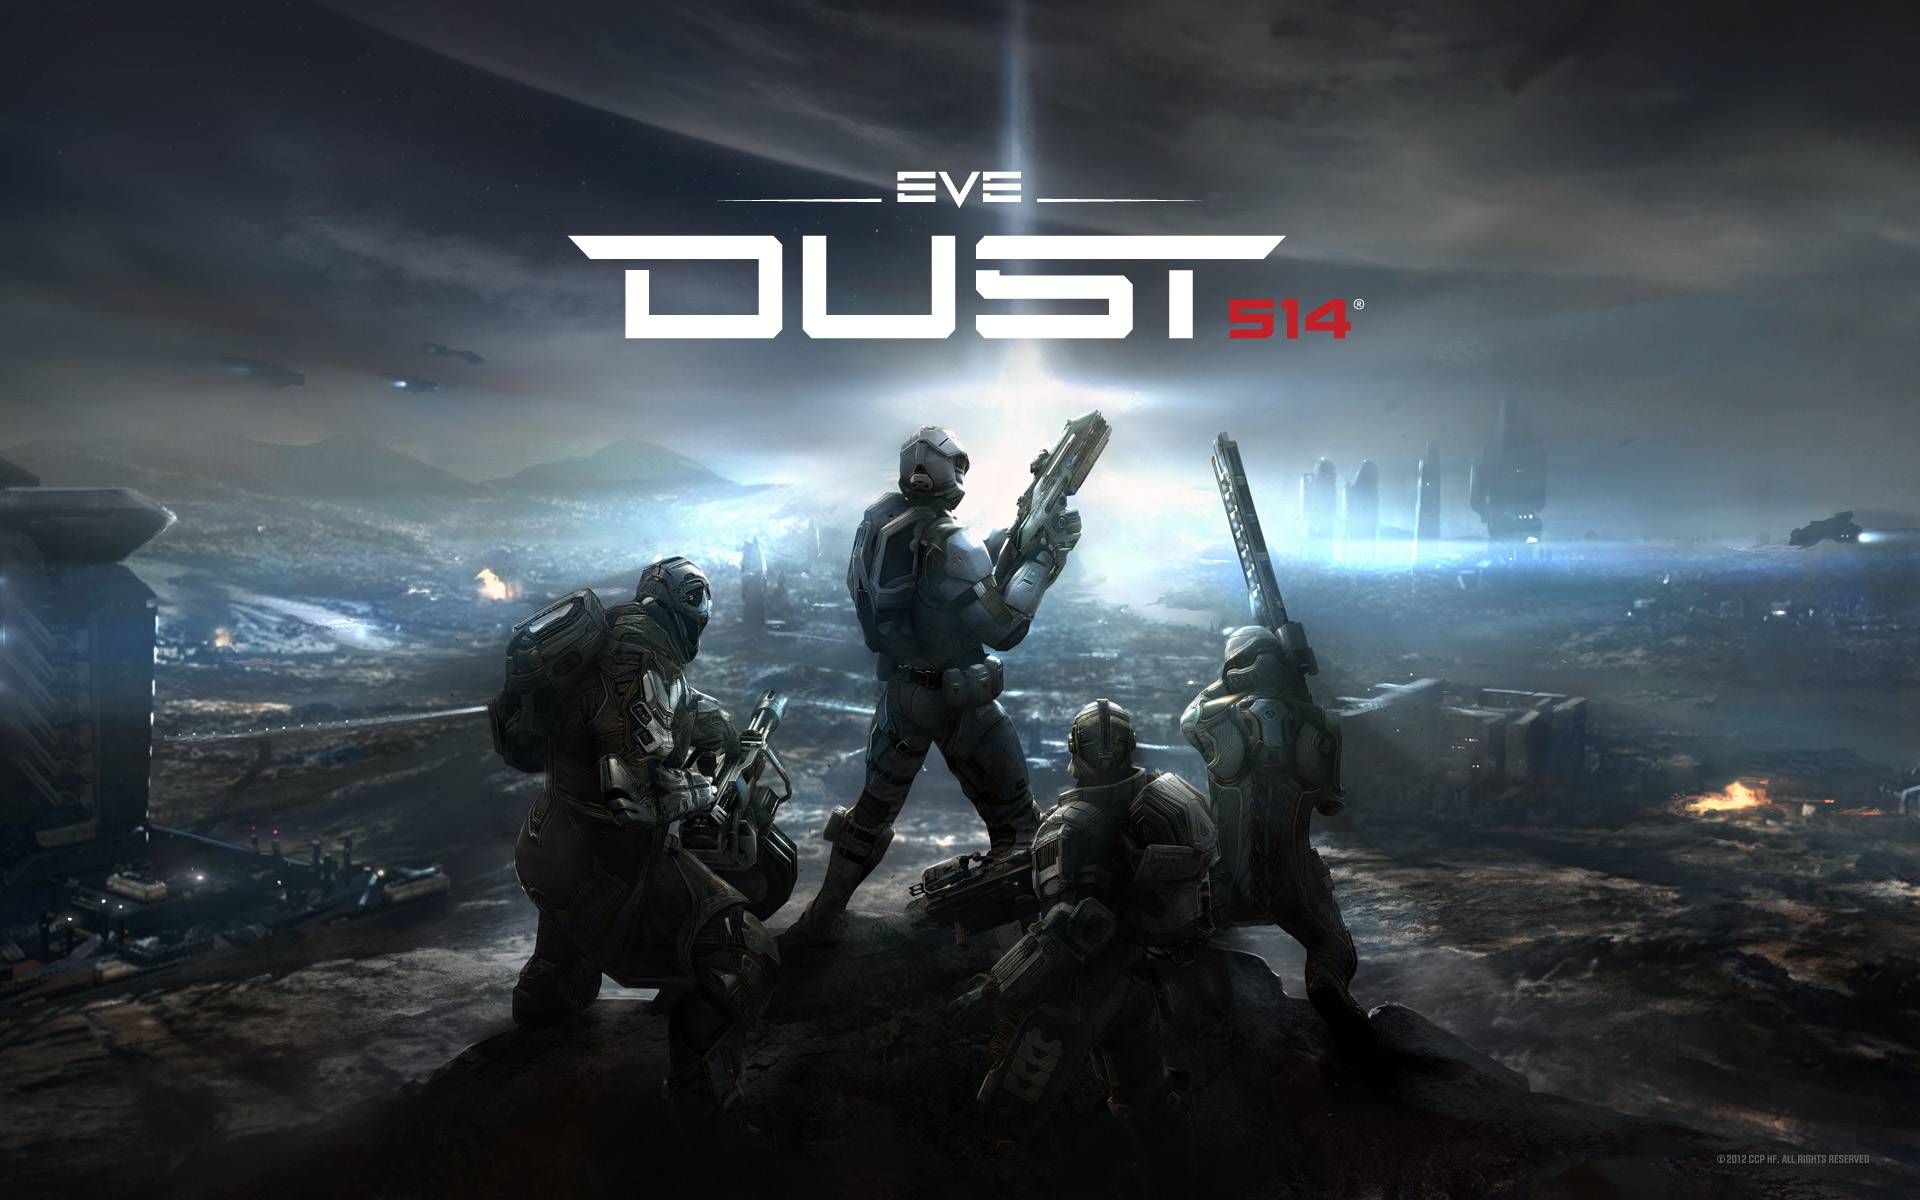 Dust 514 Wallpapers Images, Photos, Reviews